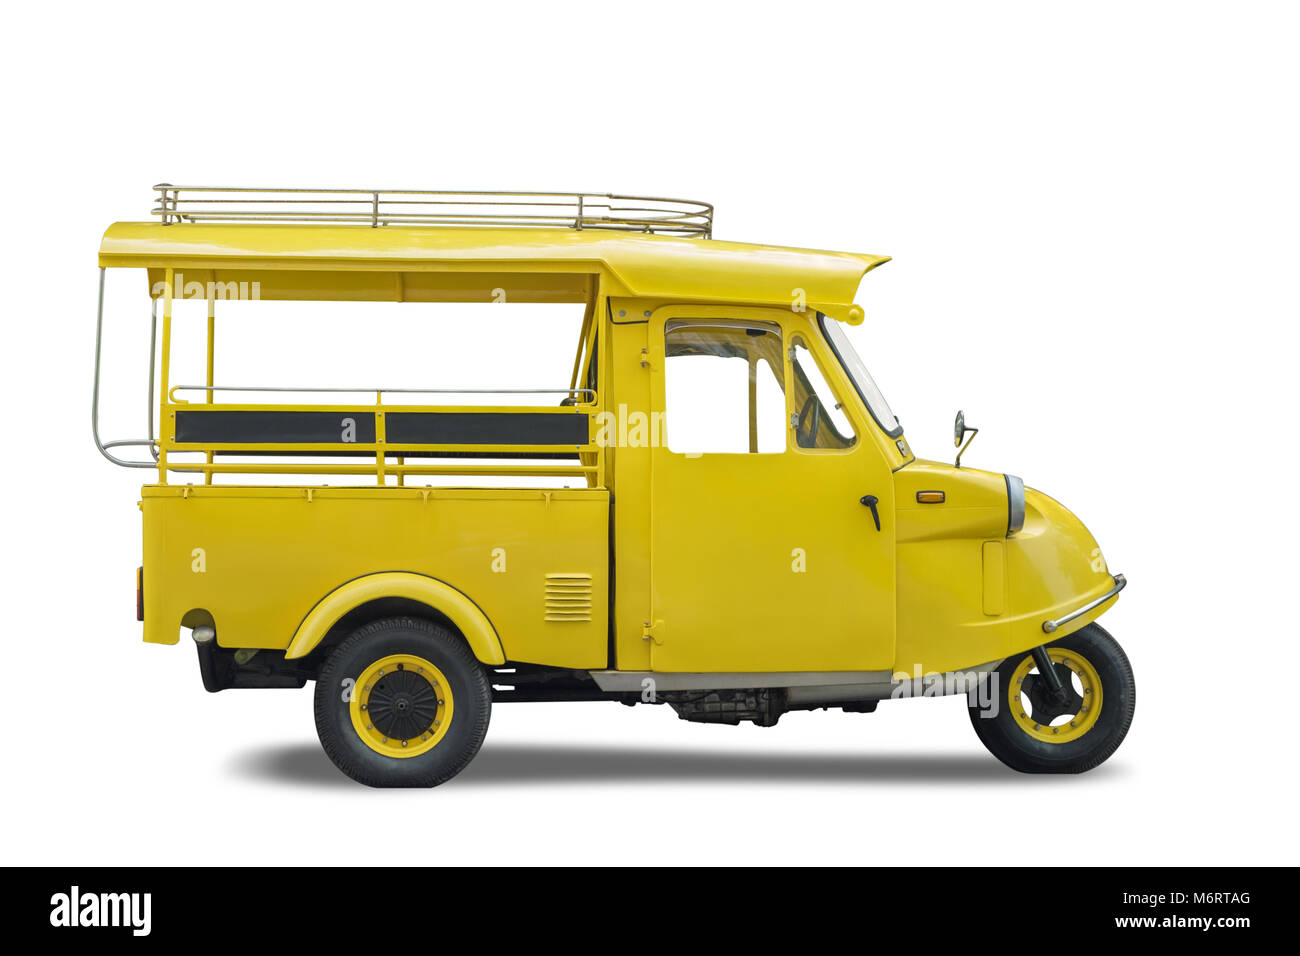 Vintage yellow auto rickshaw taxi, Thailand native taxi call 'tuk-tuk', Isolated on white background, Clipping path included Stock Photo